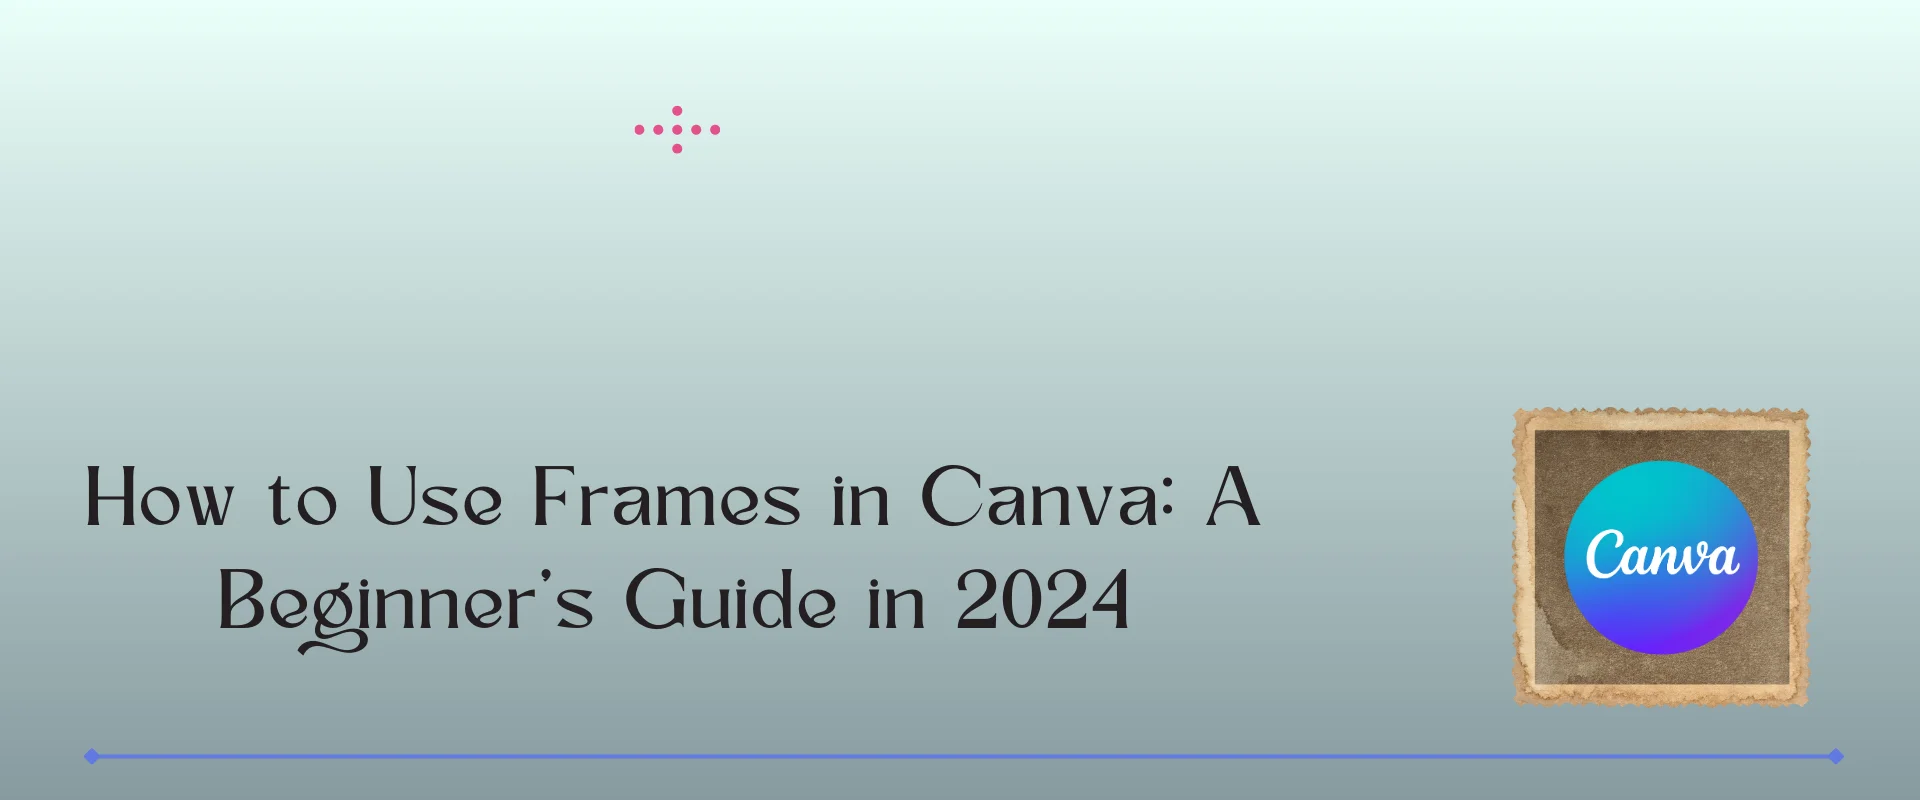 how to use frames in canva